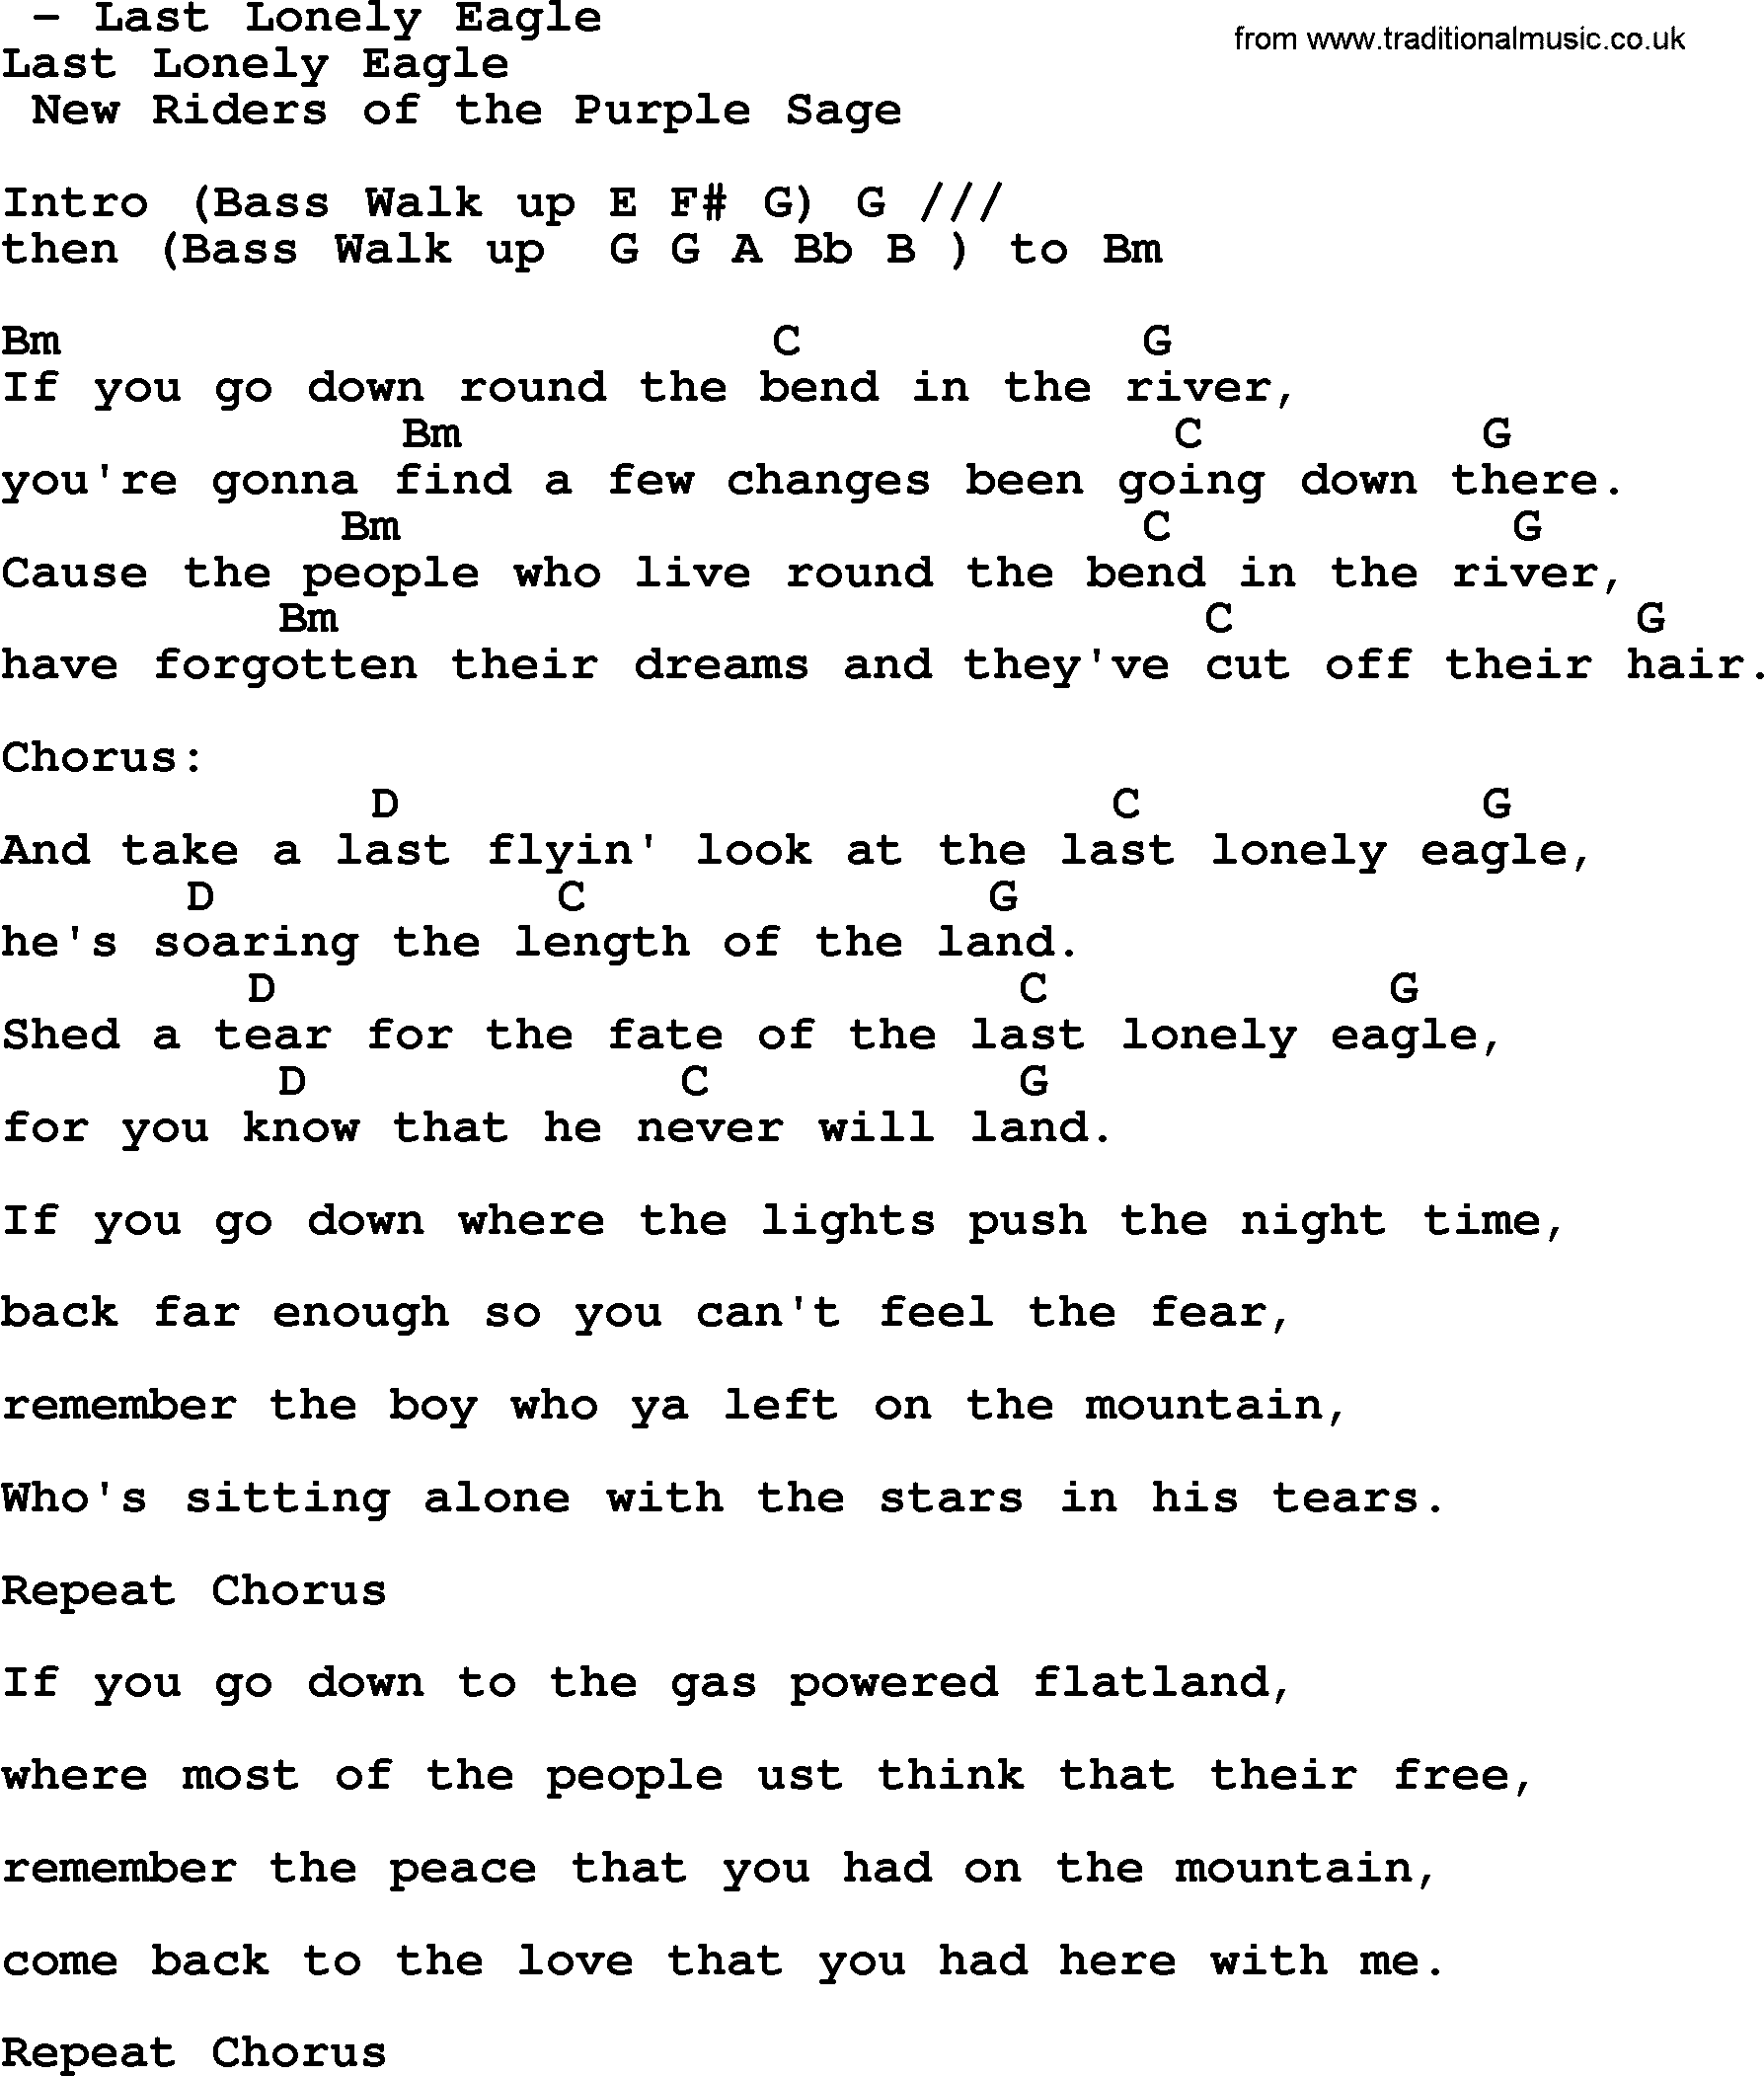 Bluegrass song: Last Lonely Eagle, lyrics and chords